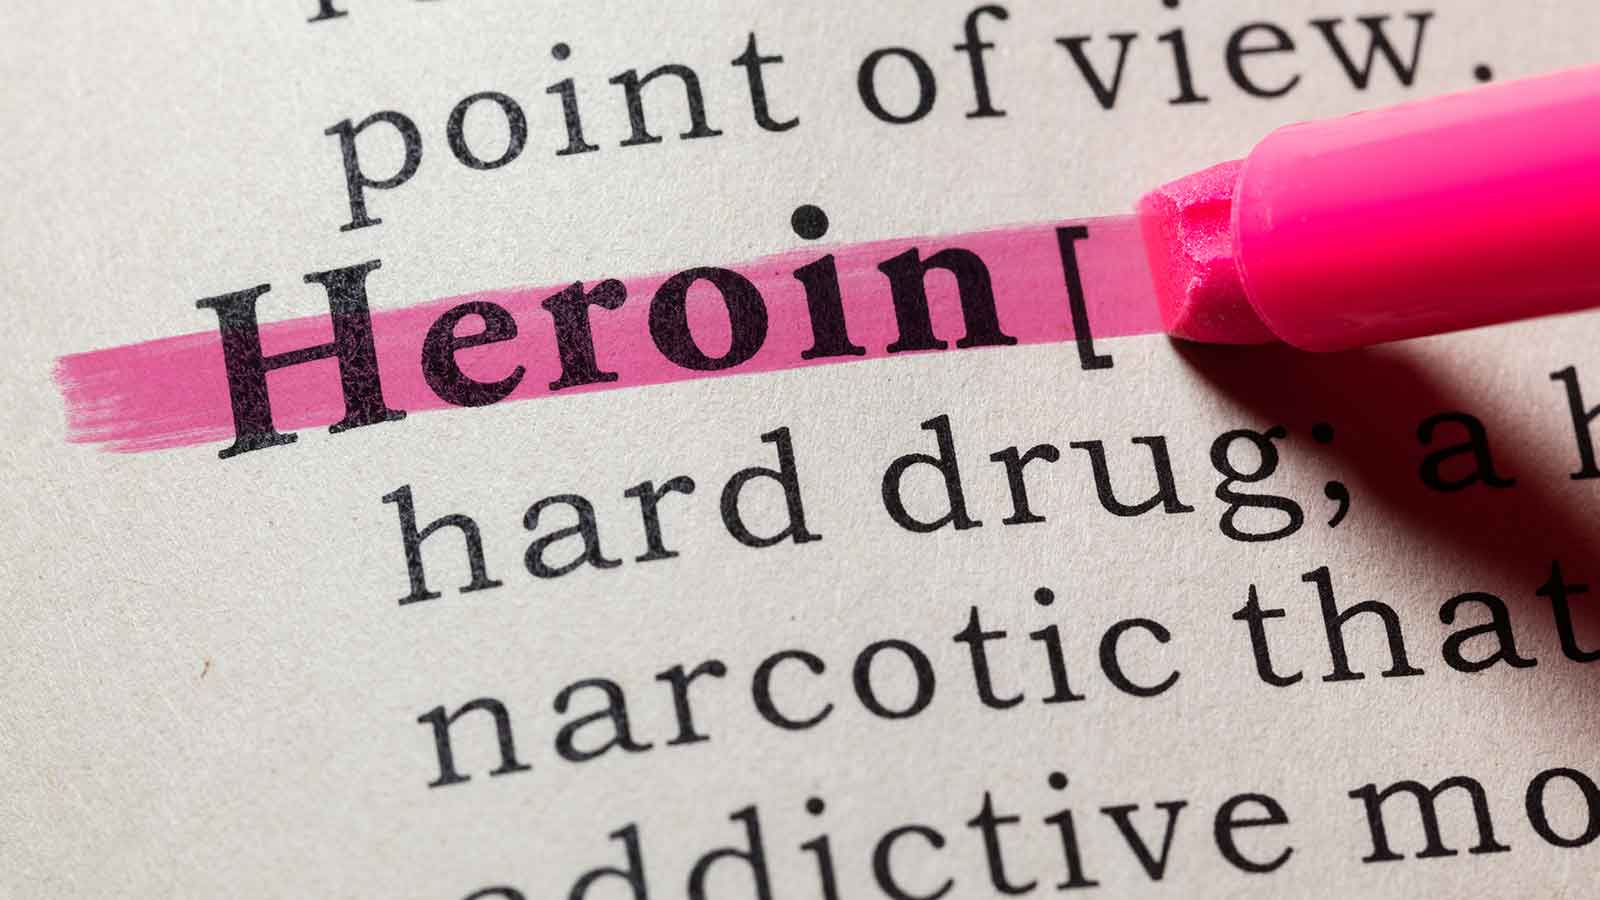 understanding heroin addiction and drug abuse